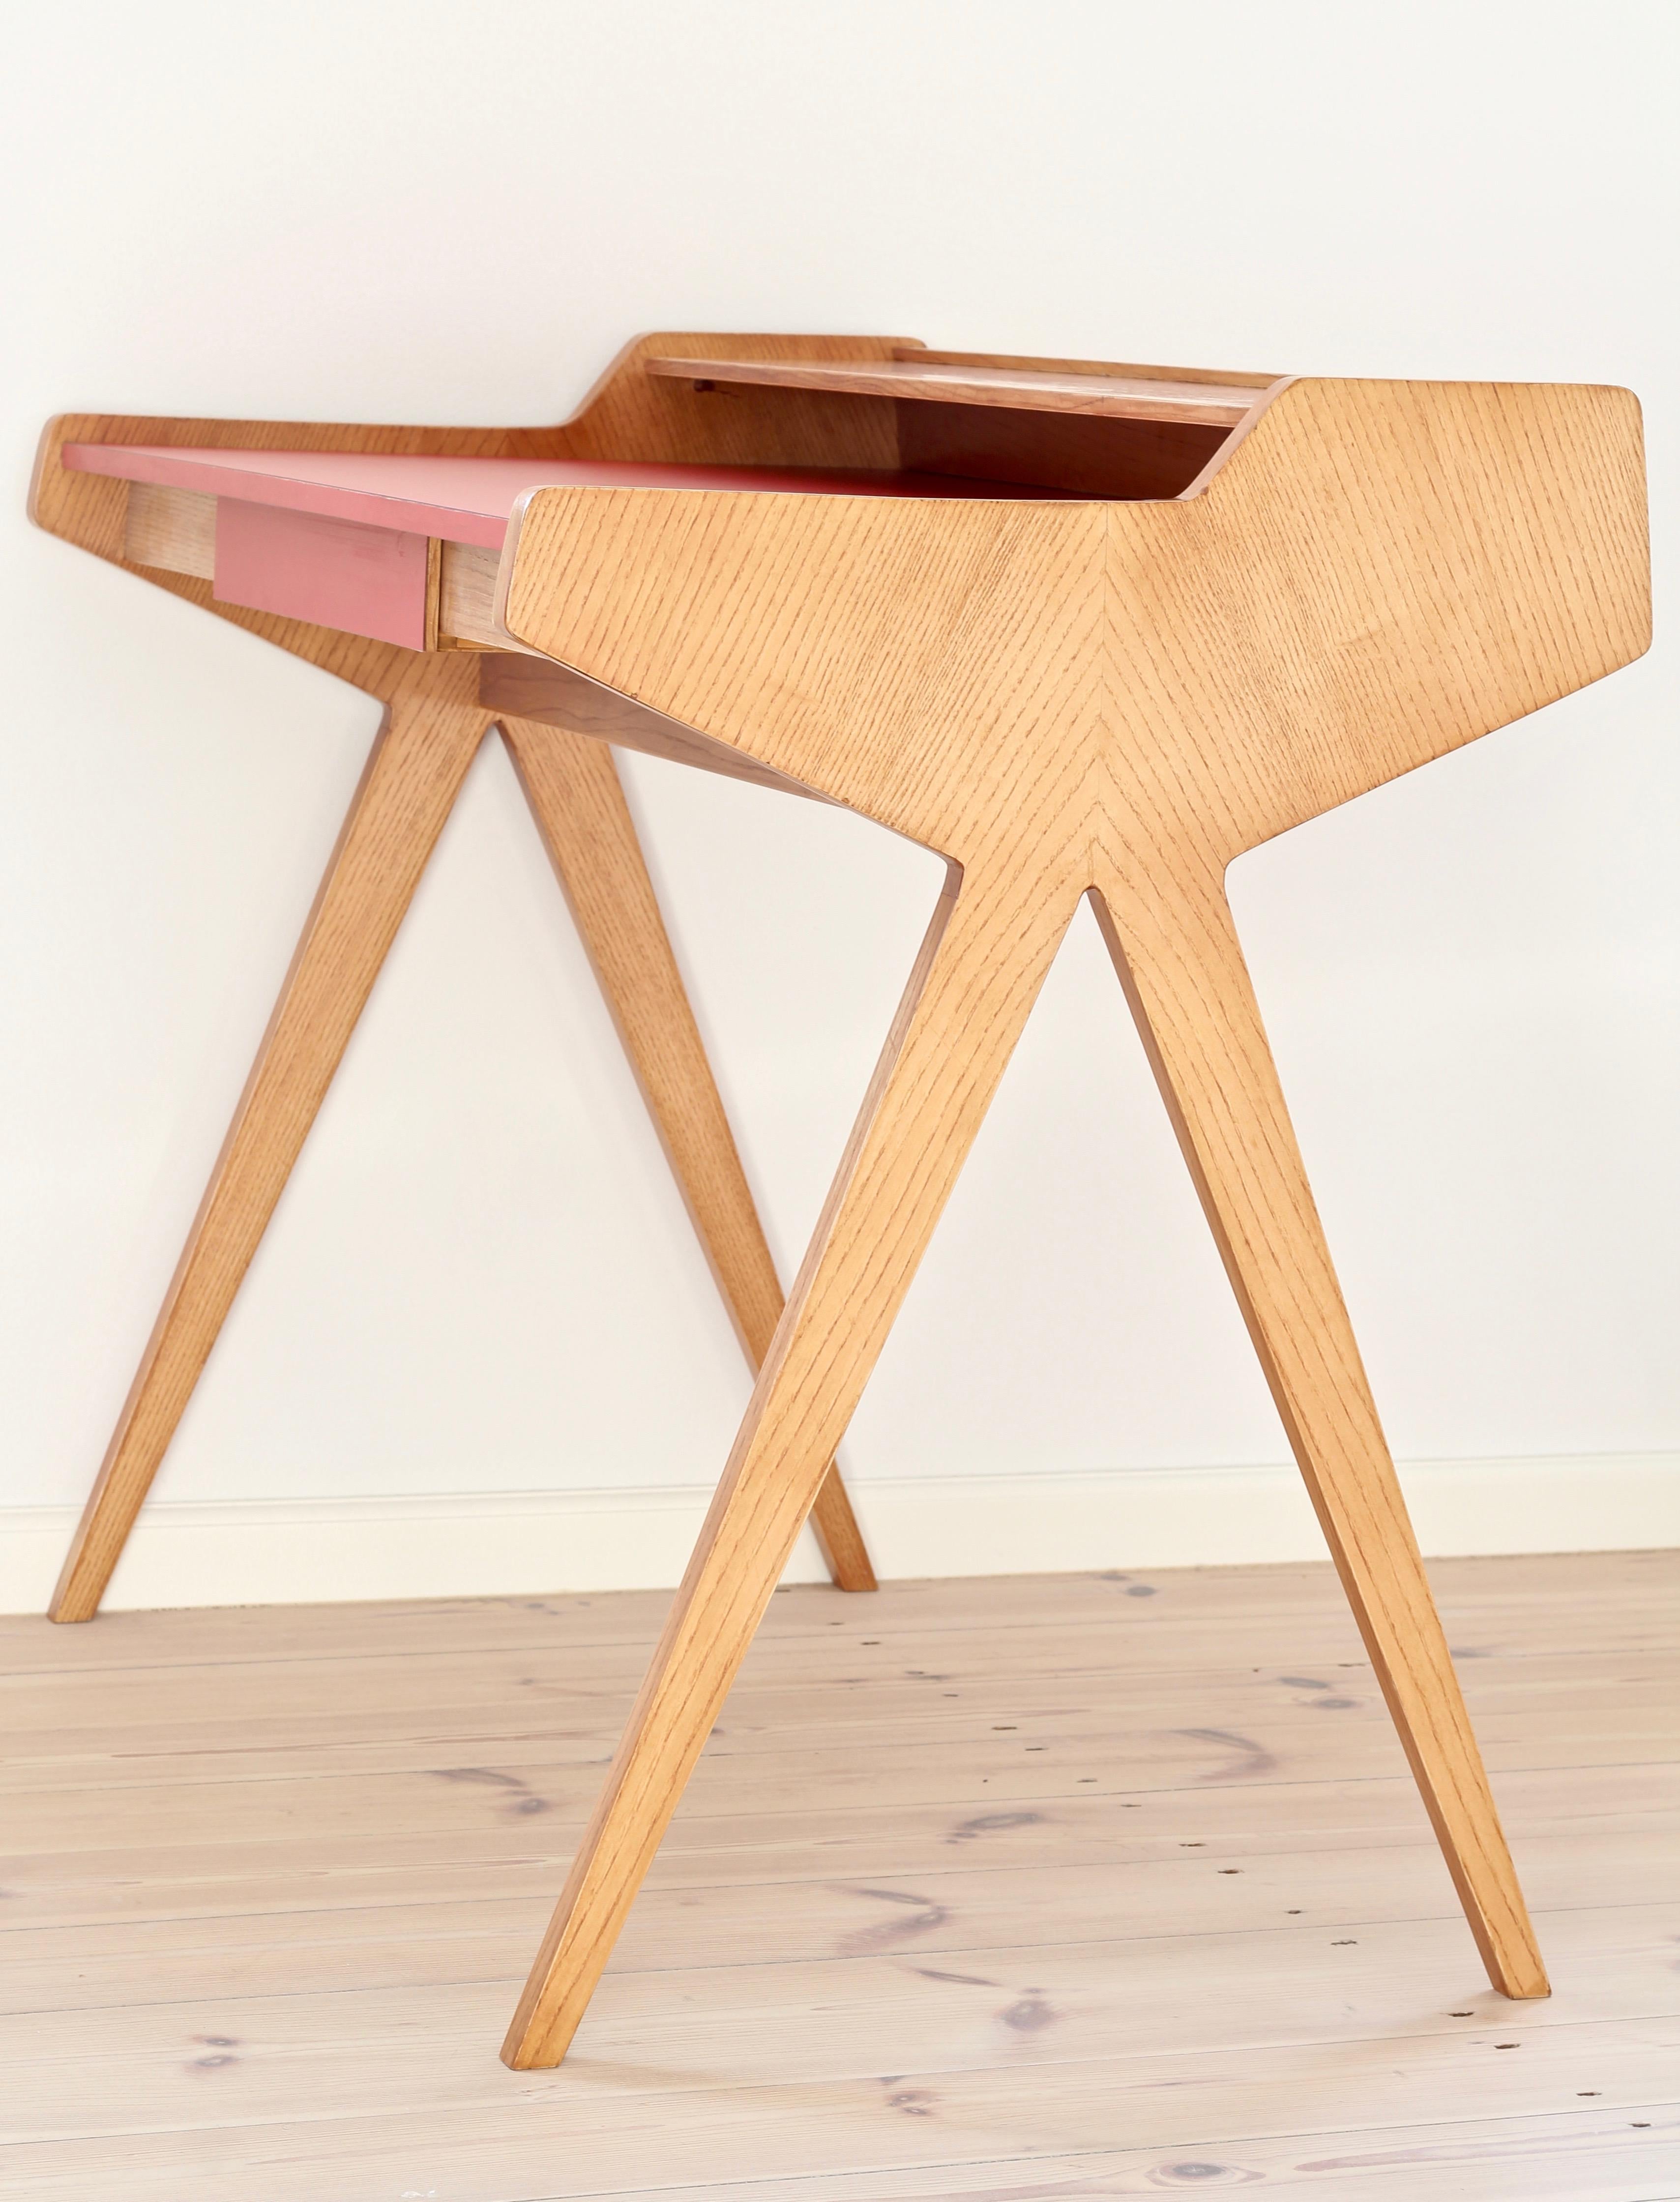 Mid-Century Modern Writing Table, Desk by Helmut Magg for WK Möbel, Midcentury, 1950s